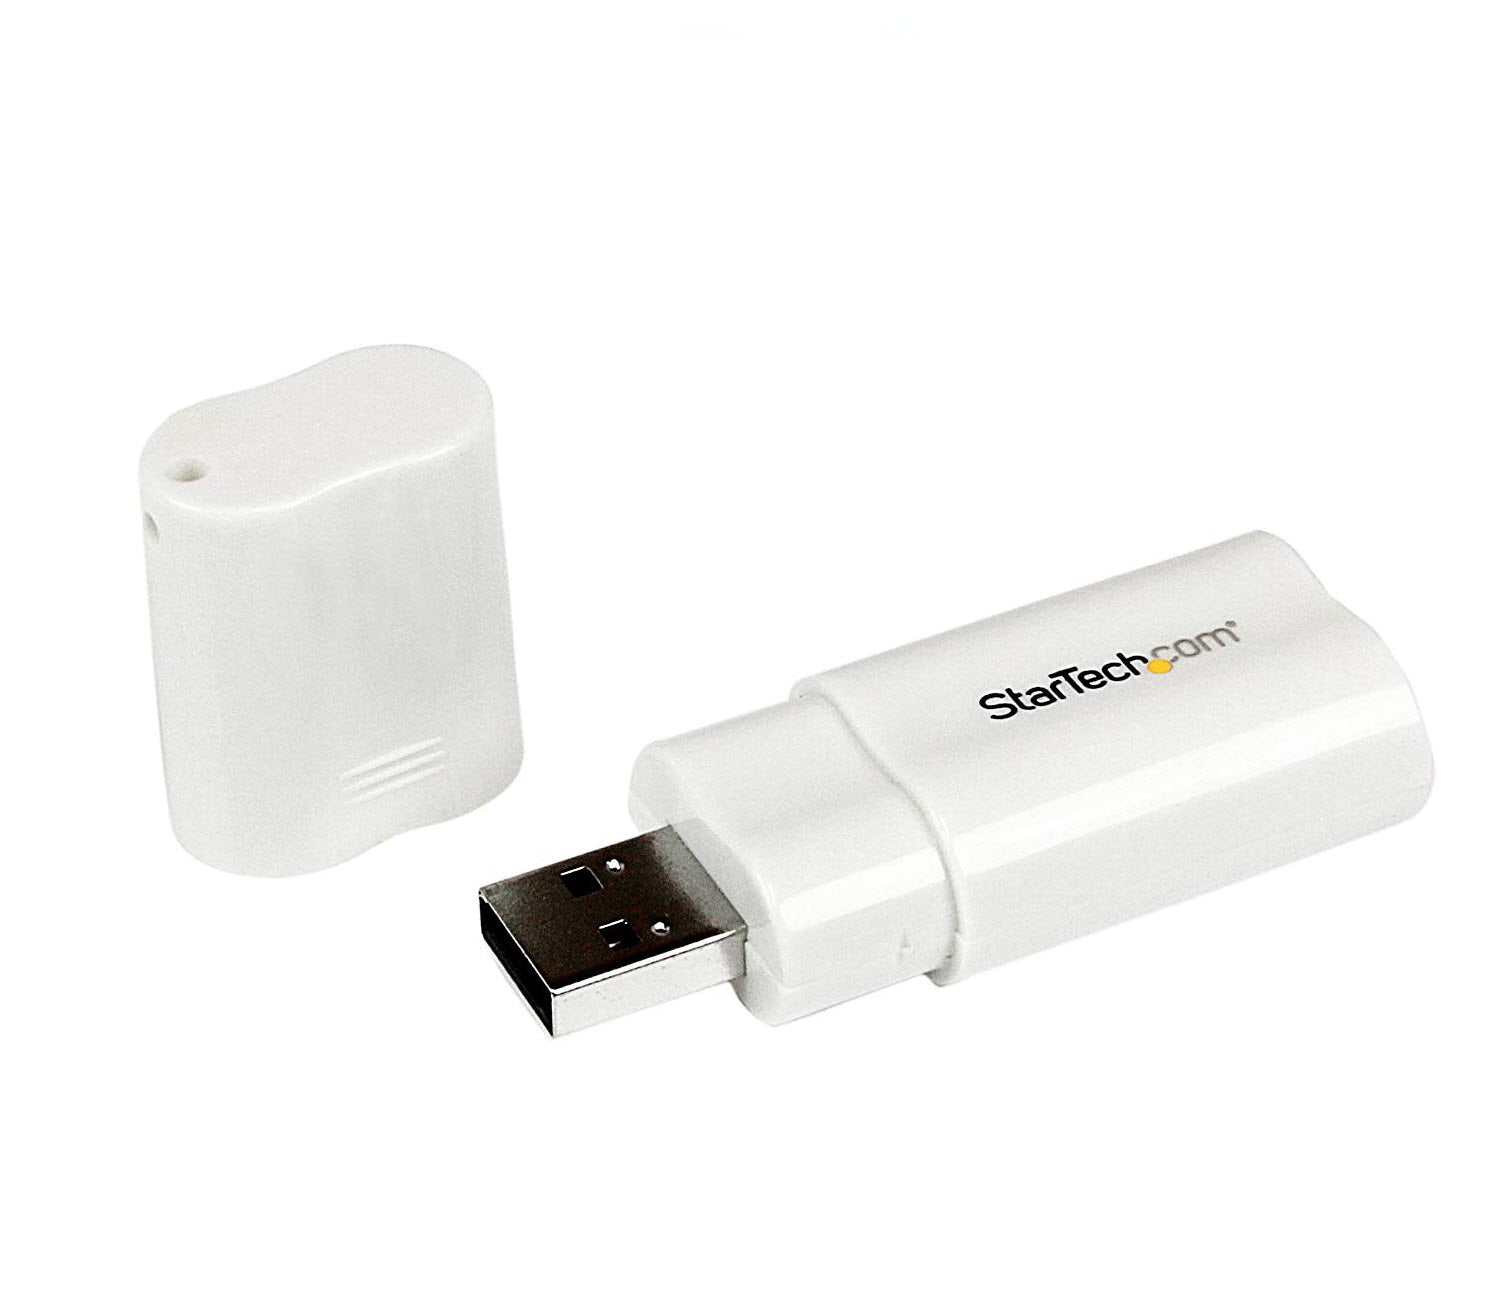 USB to Stereo Audio Adapter Converter - USB stereo Adapter - USB External sound Card